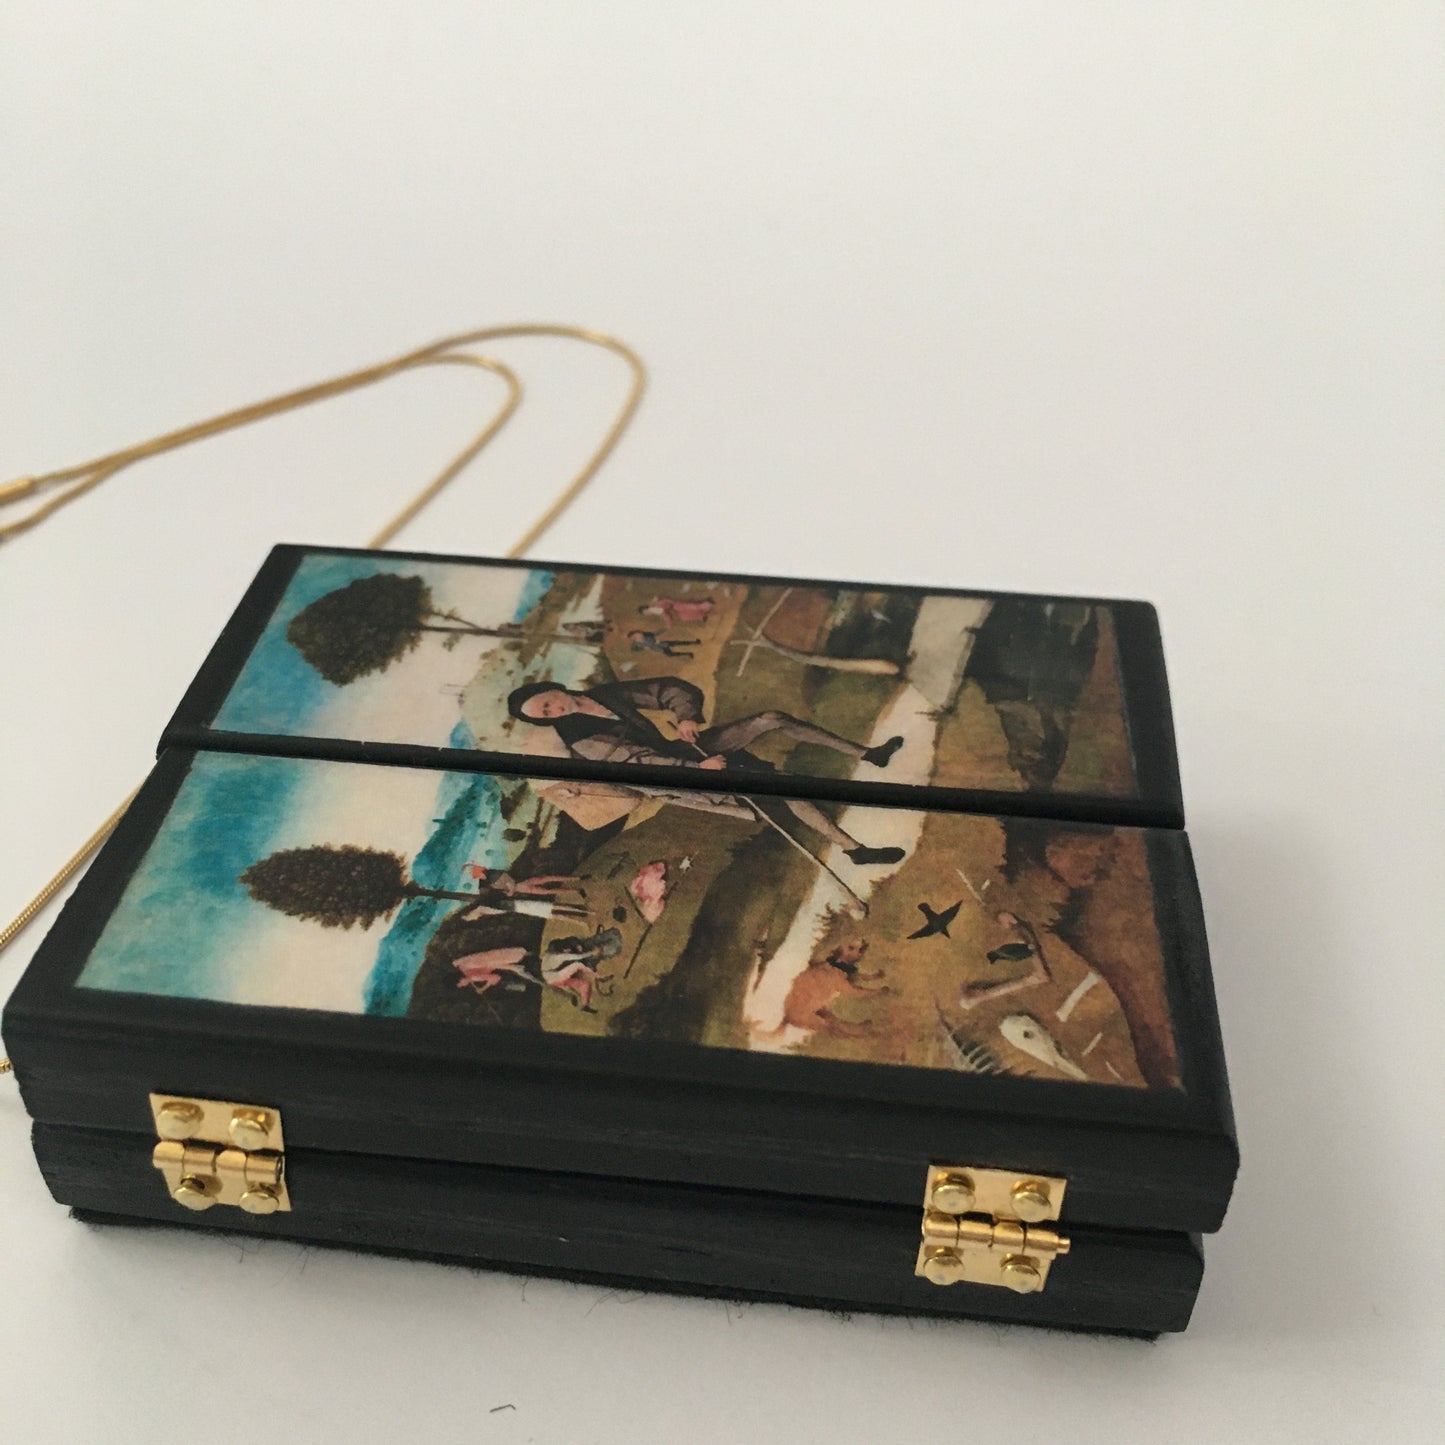 Triptych miniature art necklace handmade from sustainable wood reproduce The Haywain painting by Hieronymus Bosch. This aesthetic fully functioning art pendant necklace is created and designed by Obljewellery